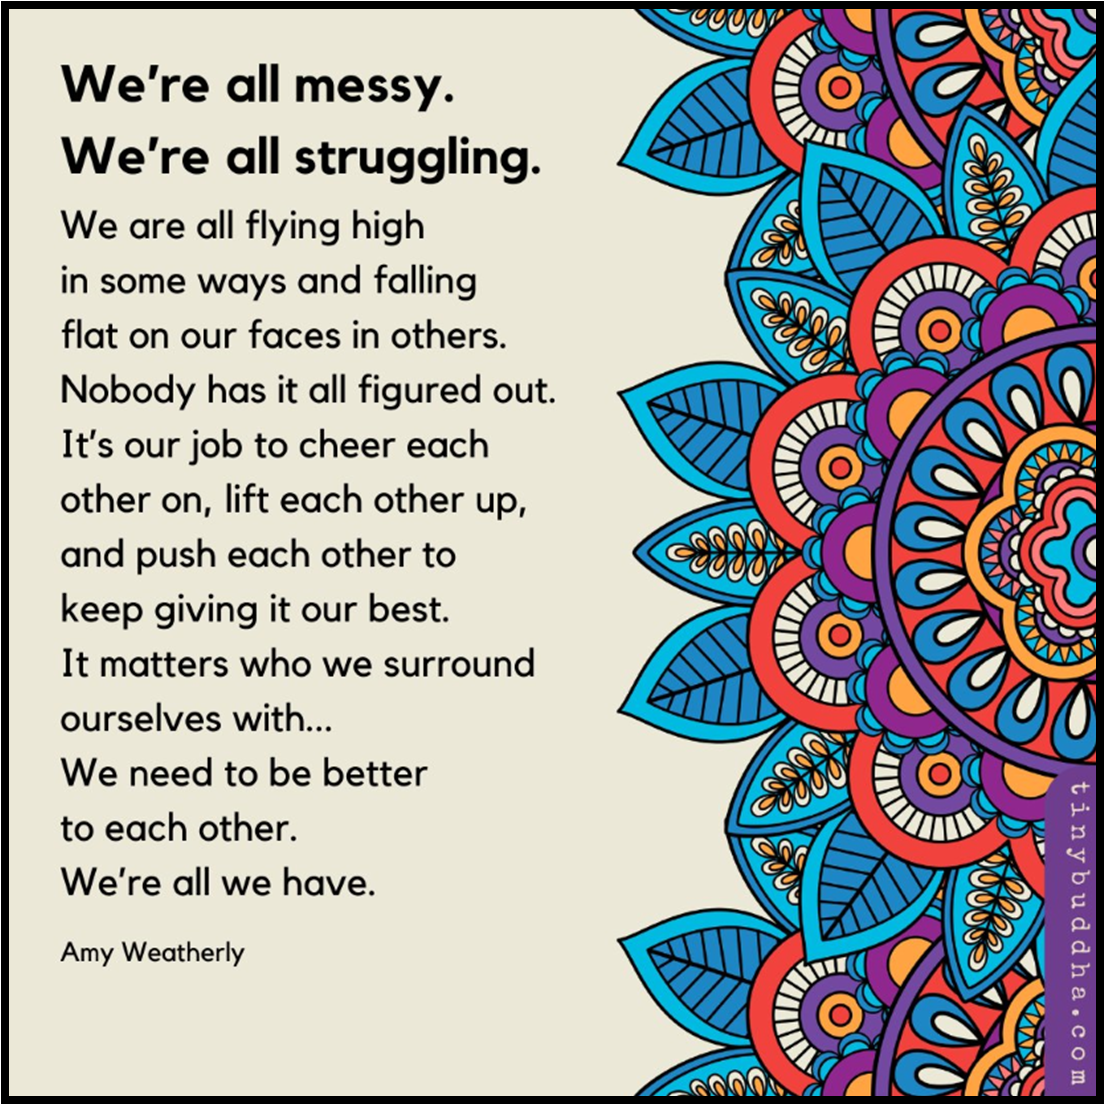 We're all messy. We're all struggling